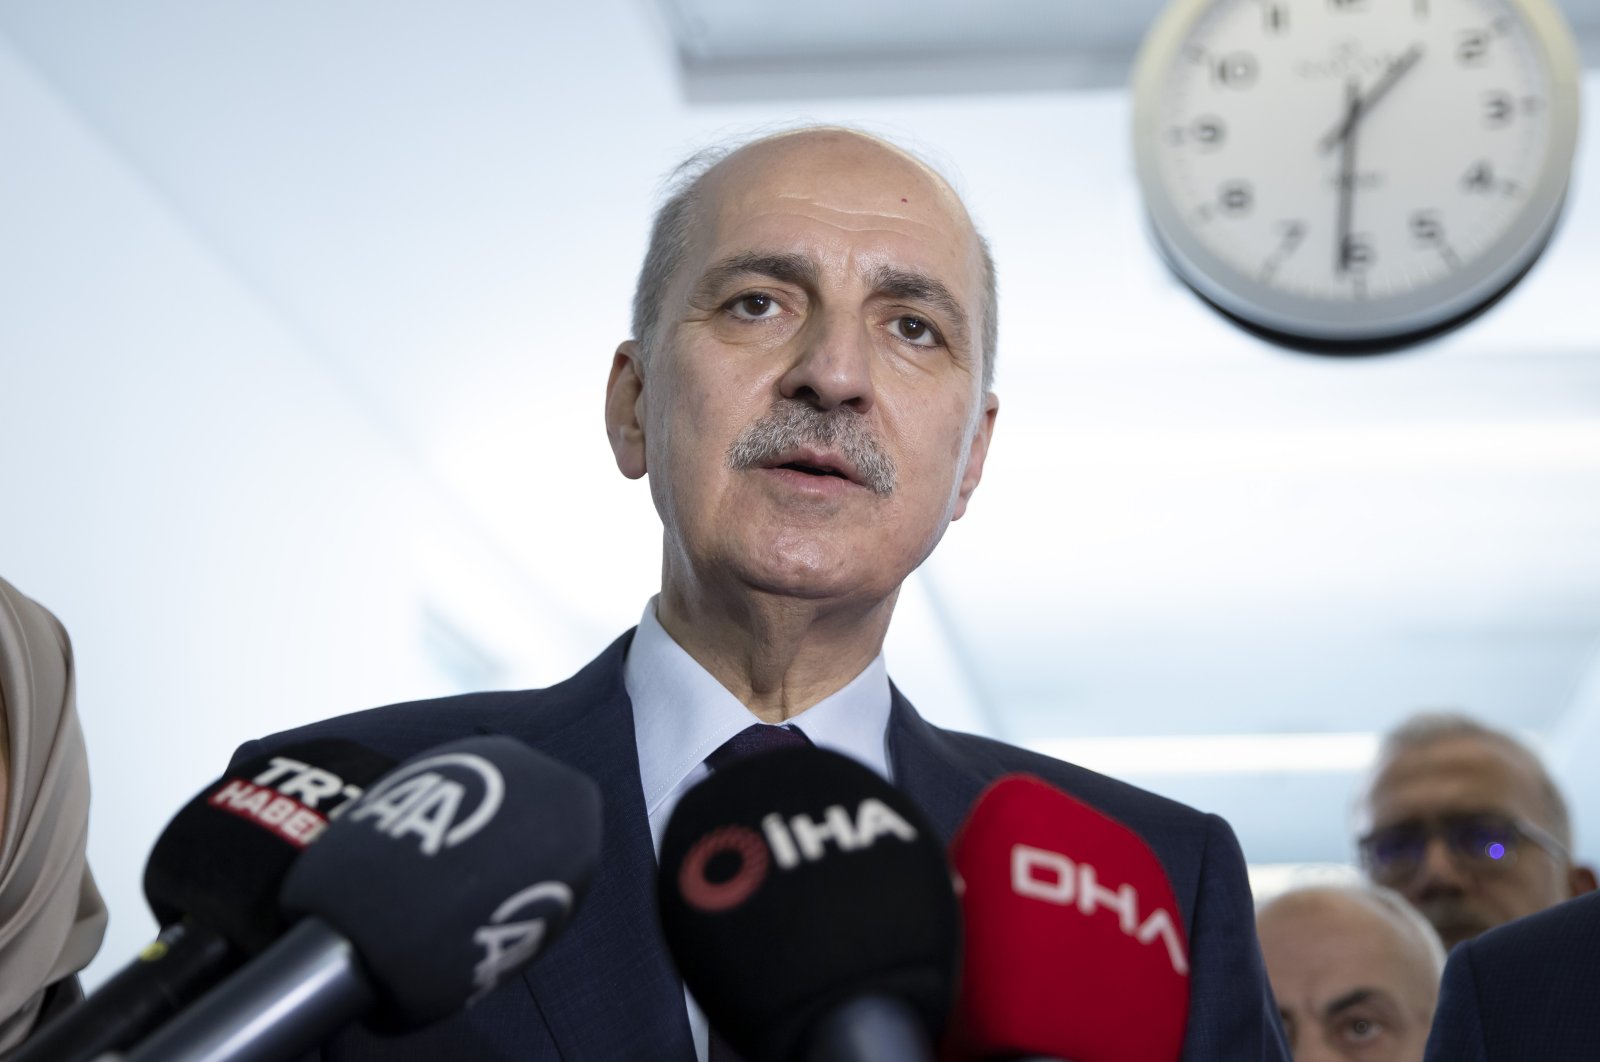 Numan Kurtulmuş, Istanbul representative and deputy chairperson of the ruling Justice and Development Party (AK Party), talks to reporters after formally applying for the post of parliamentary speaker in Ankara, Türkiye, June 6, 2023. (AA Photo)